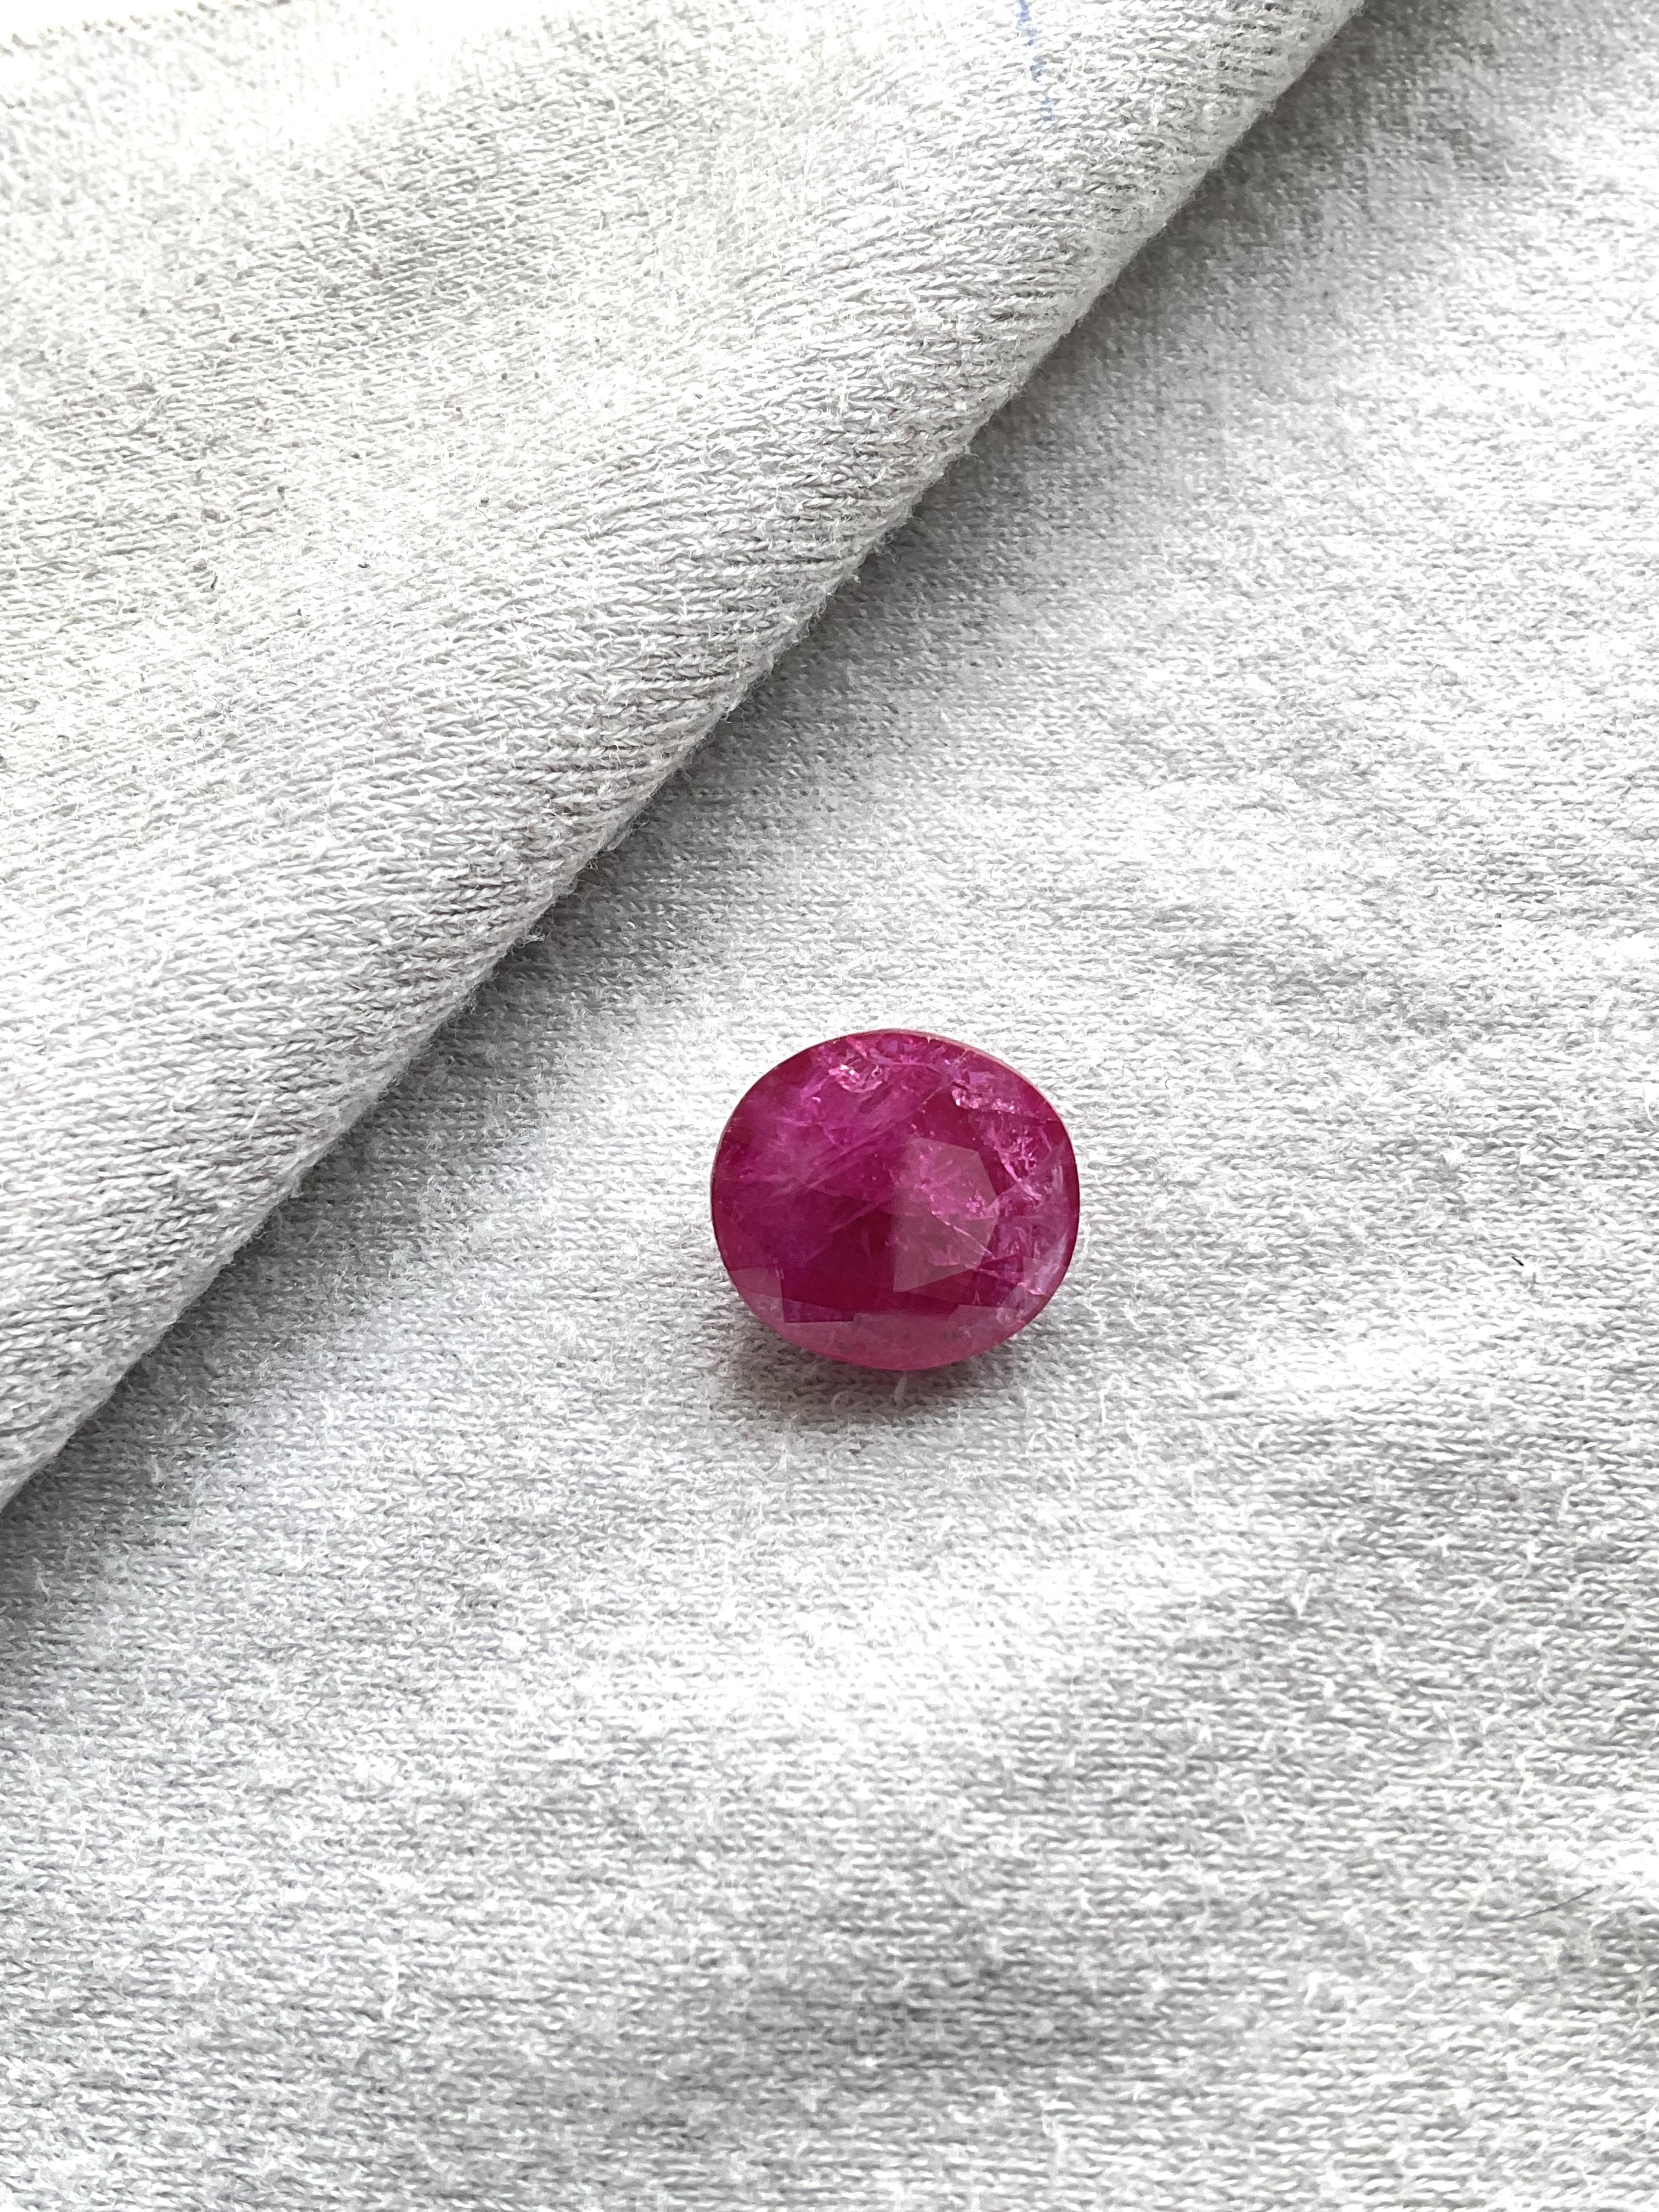 Rare Burmese Myanmar ruby no heat no treatment
Shape: Roundish Oval
Weight: 9.55 Carats
Size: 10x9 MM
Pieces: 1
Shape: Faceted round Cut stone